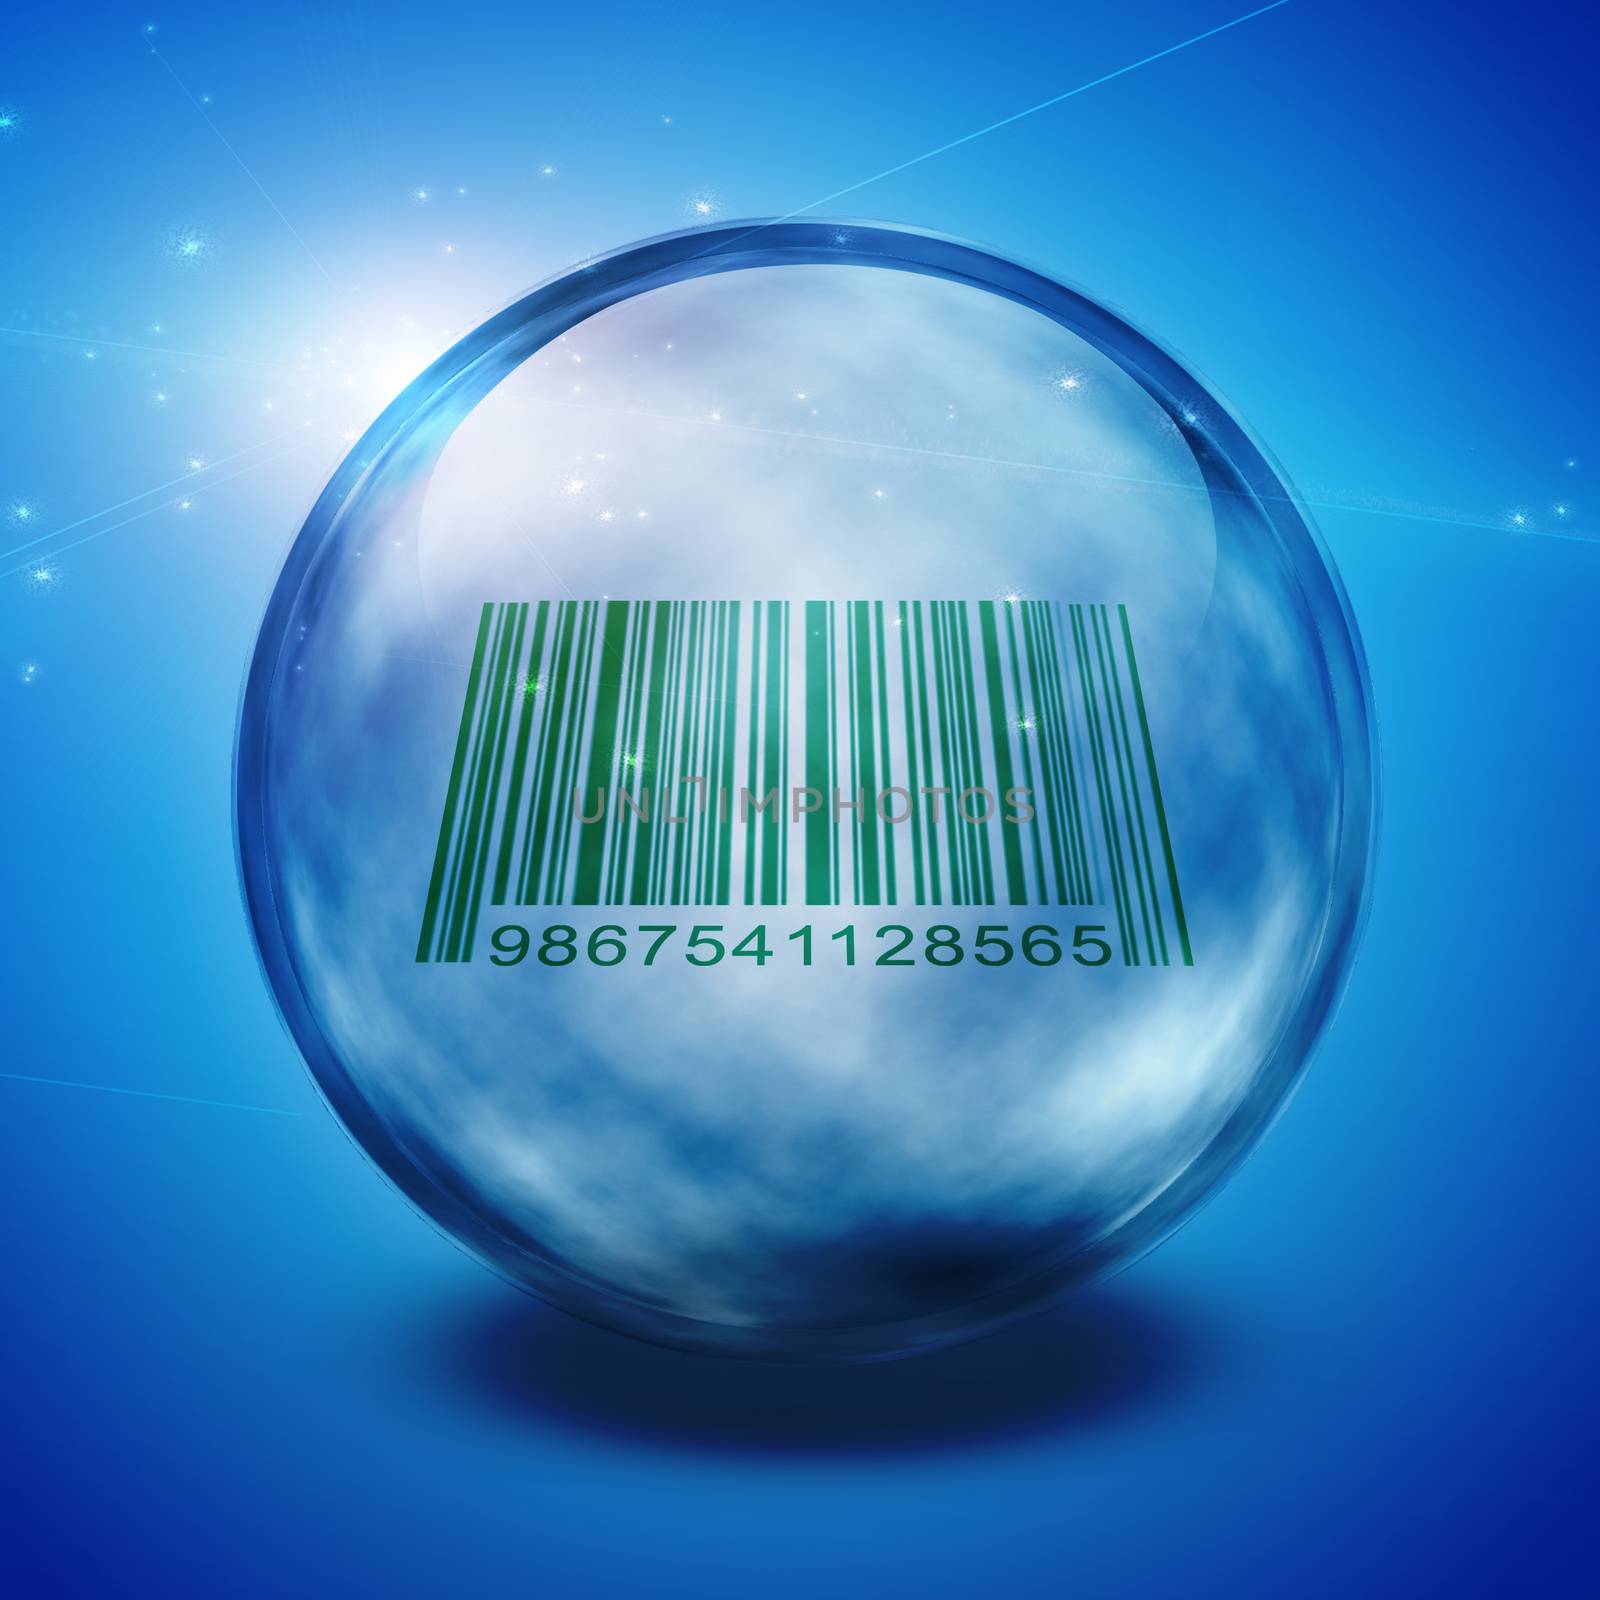 Barcode enclosed in glass sphere